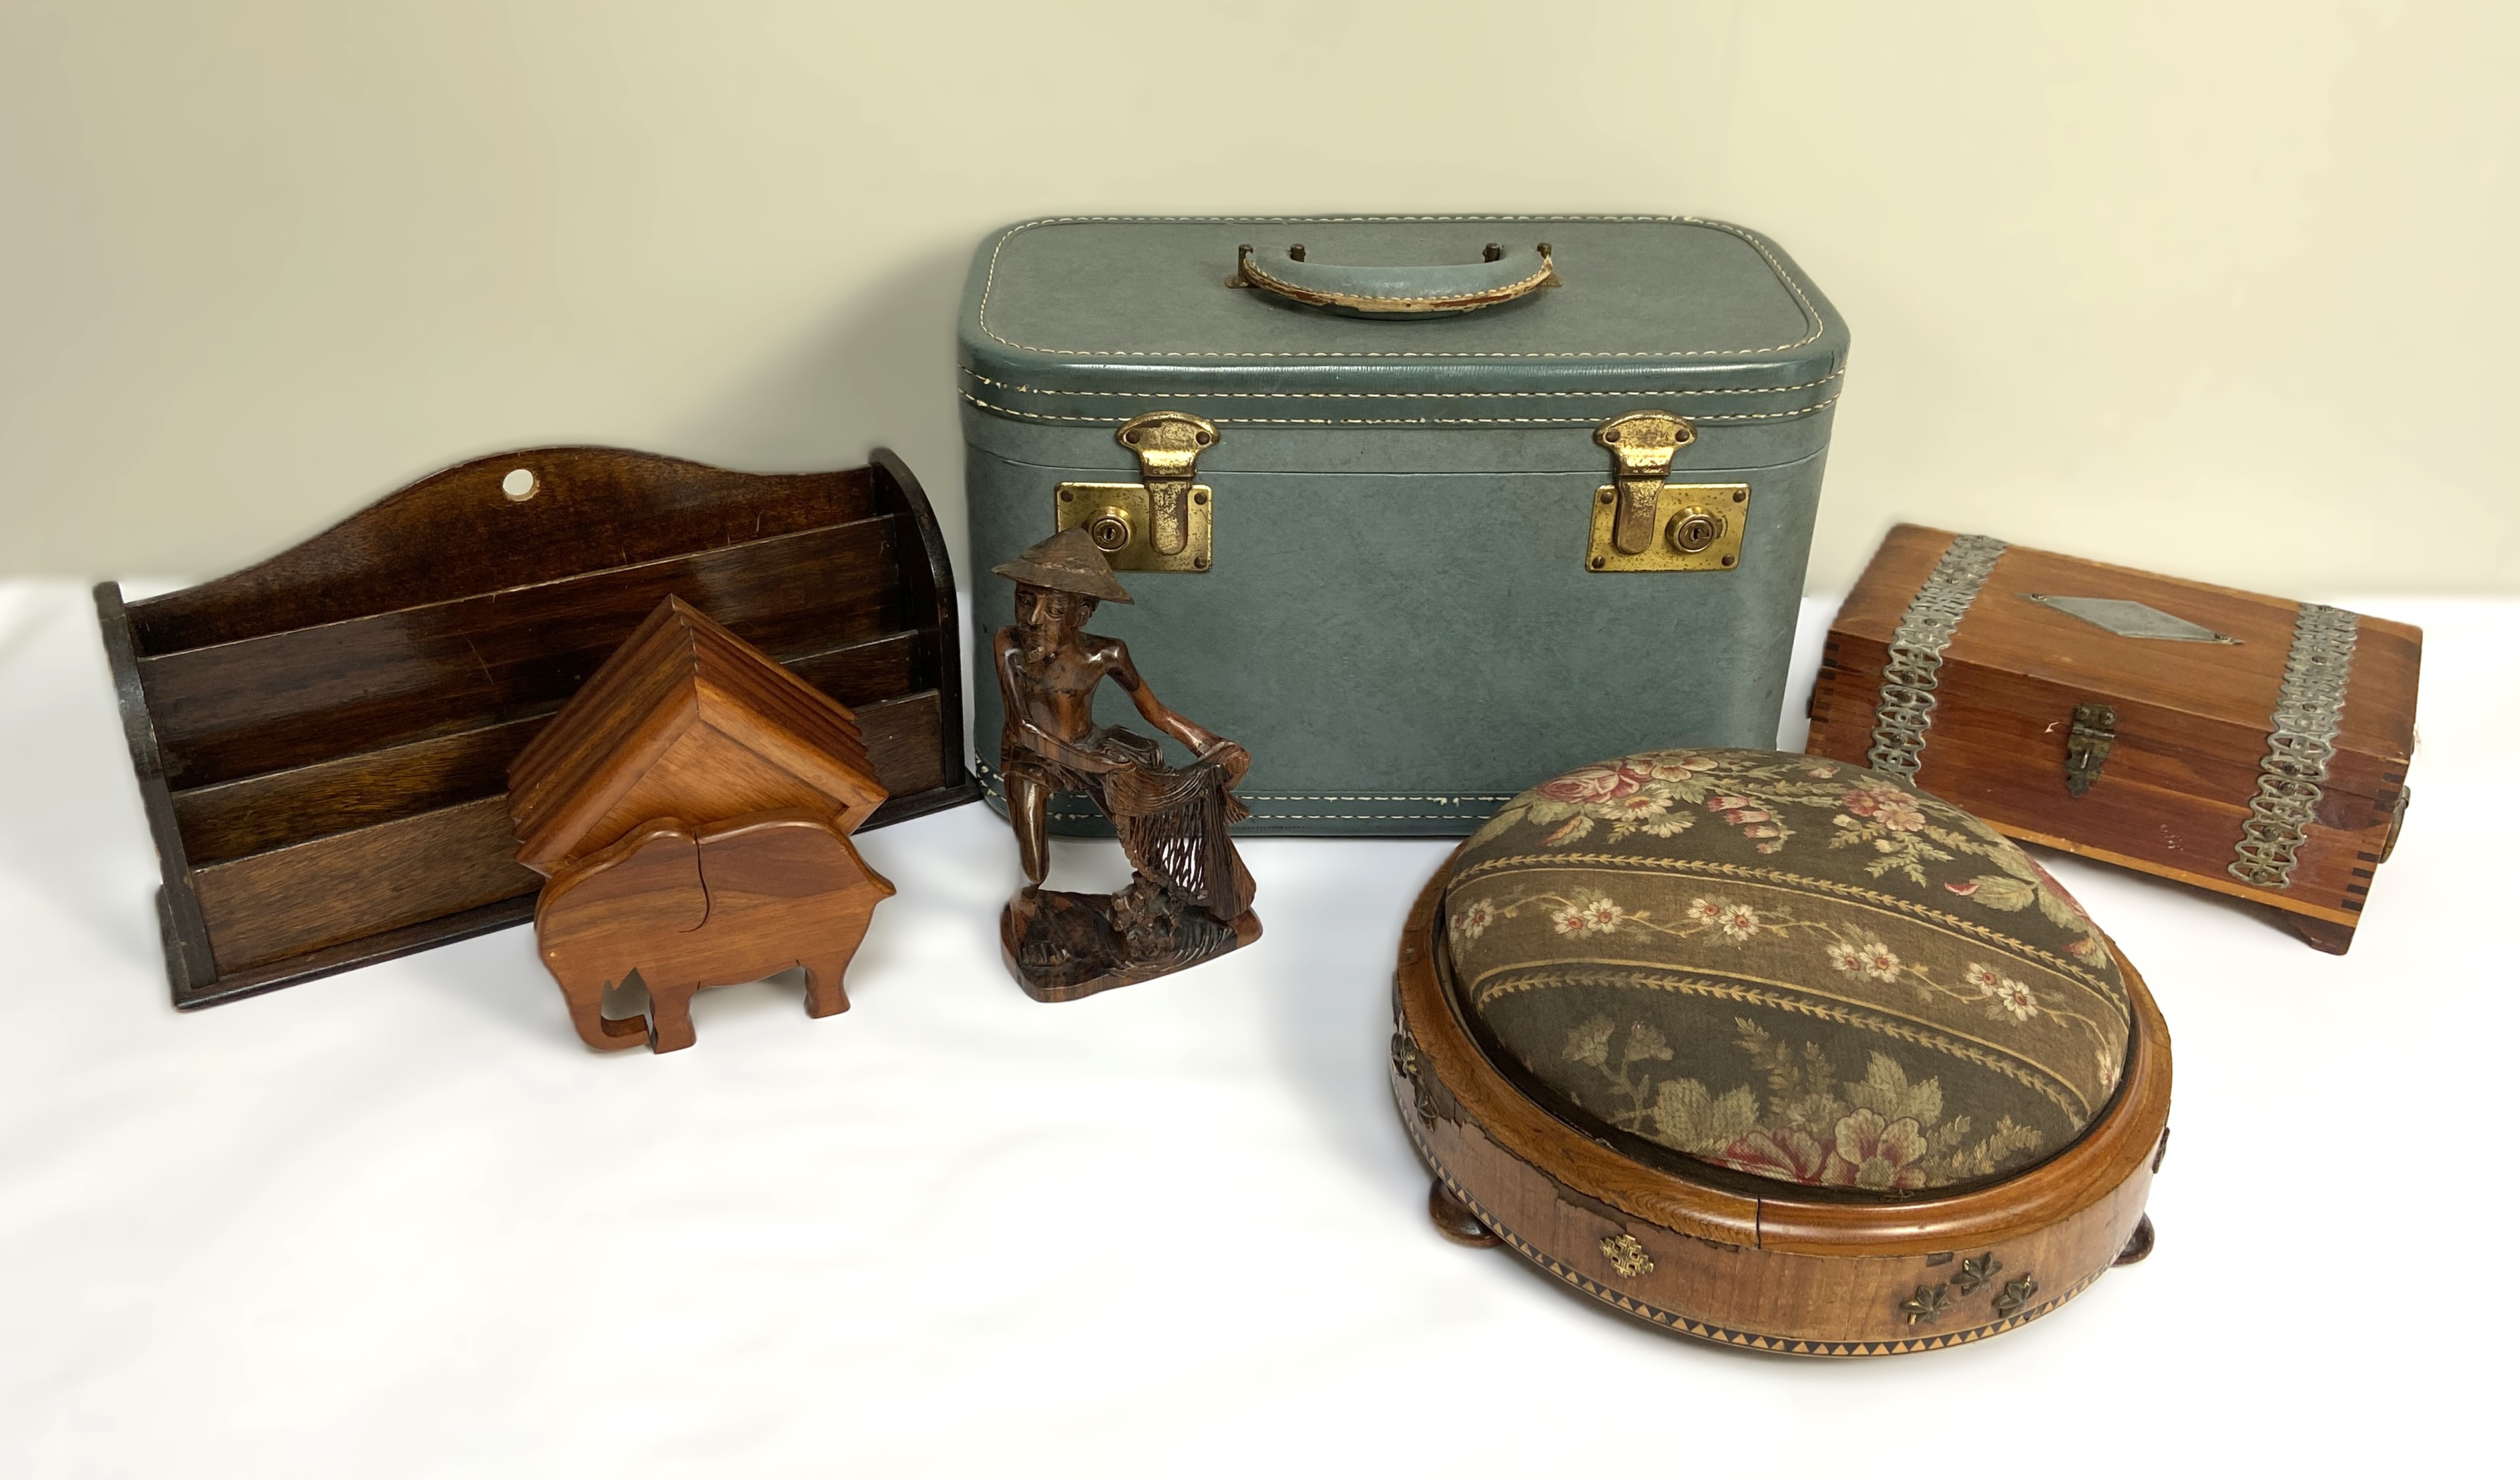 Assorted items, including an embroidered footstool, an travel vanity case, a carved figure,